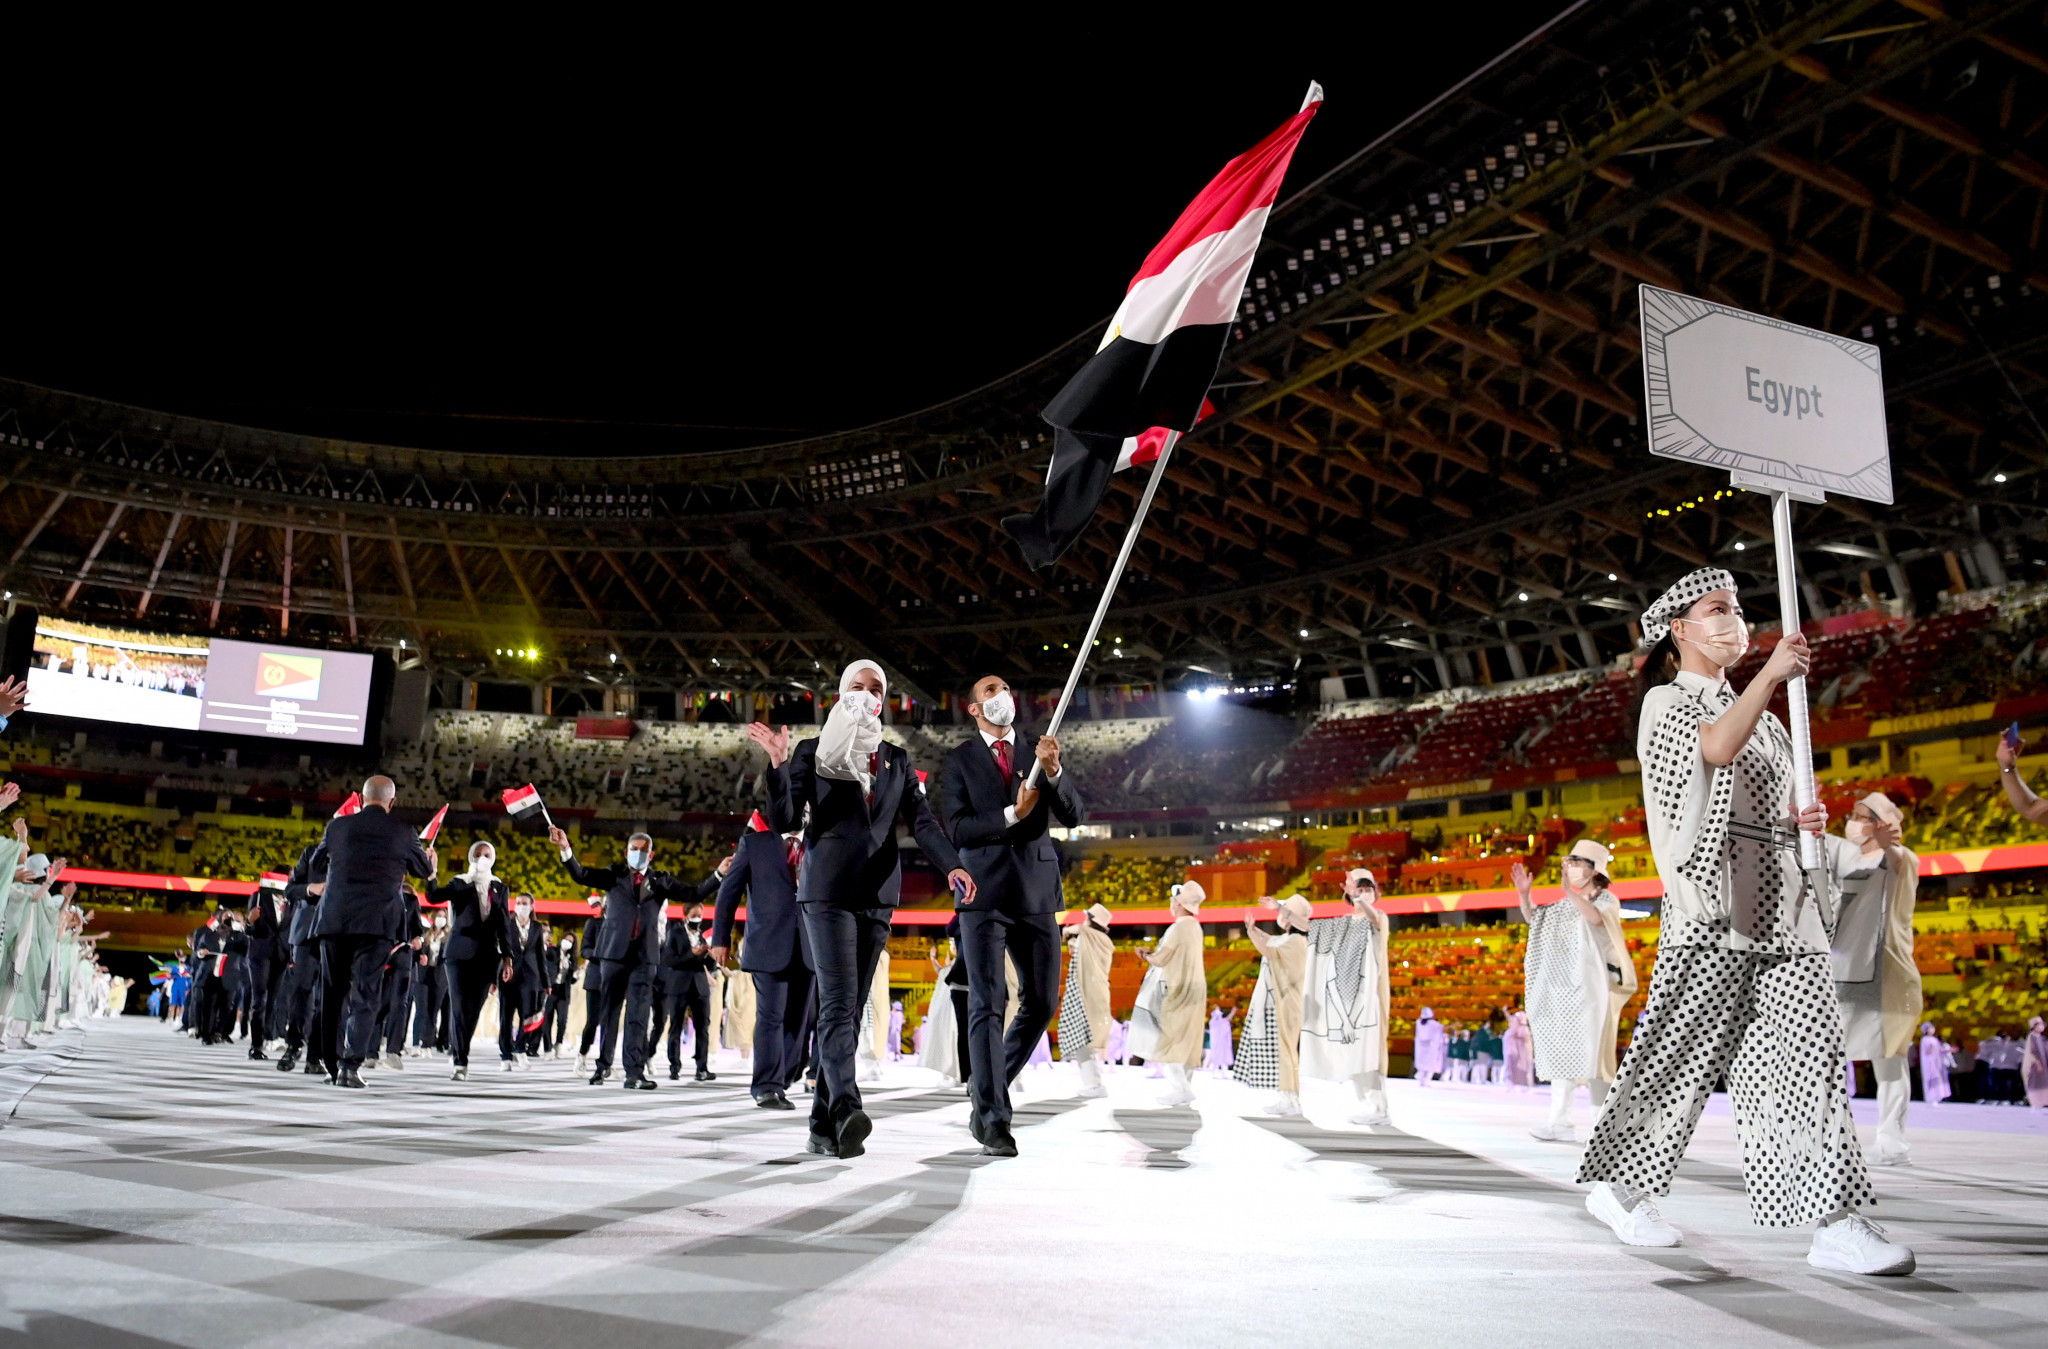 Ashraf Sobhy confirmed Egypt will apply to stage the 2036 Olympics ©EOC